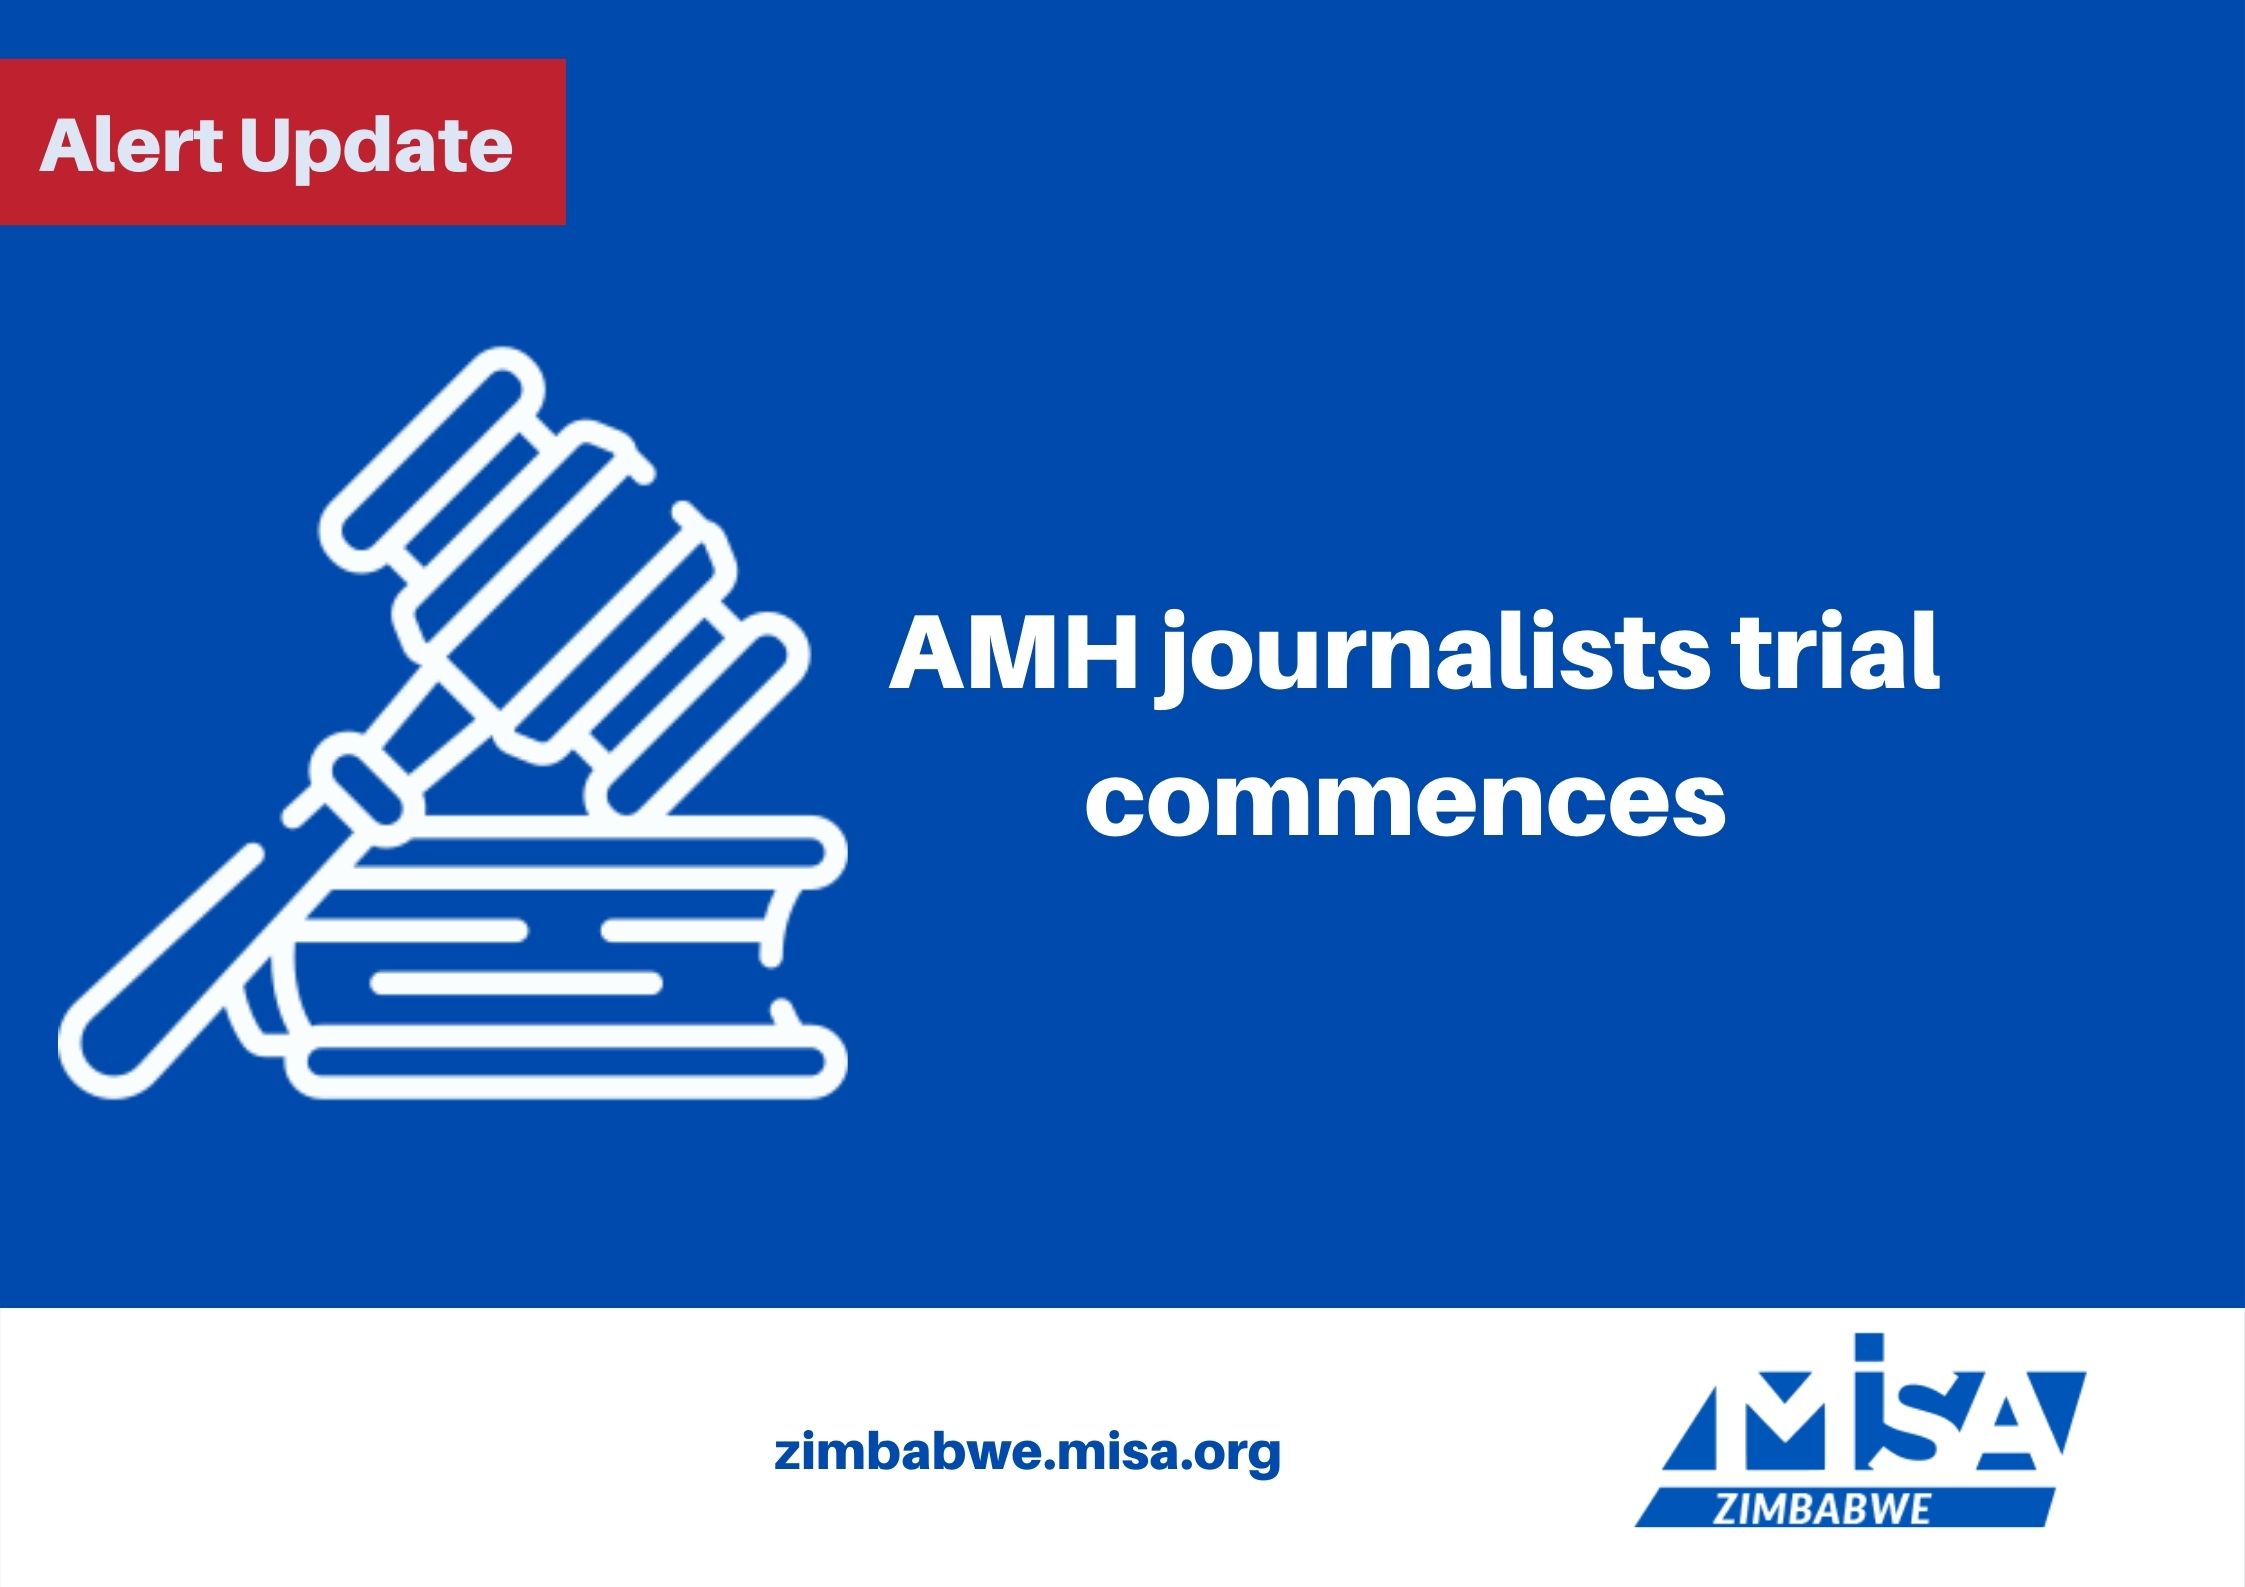 AMH journalists trial commences 